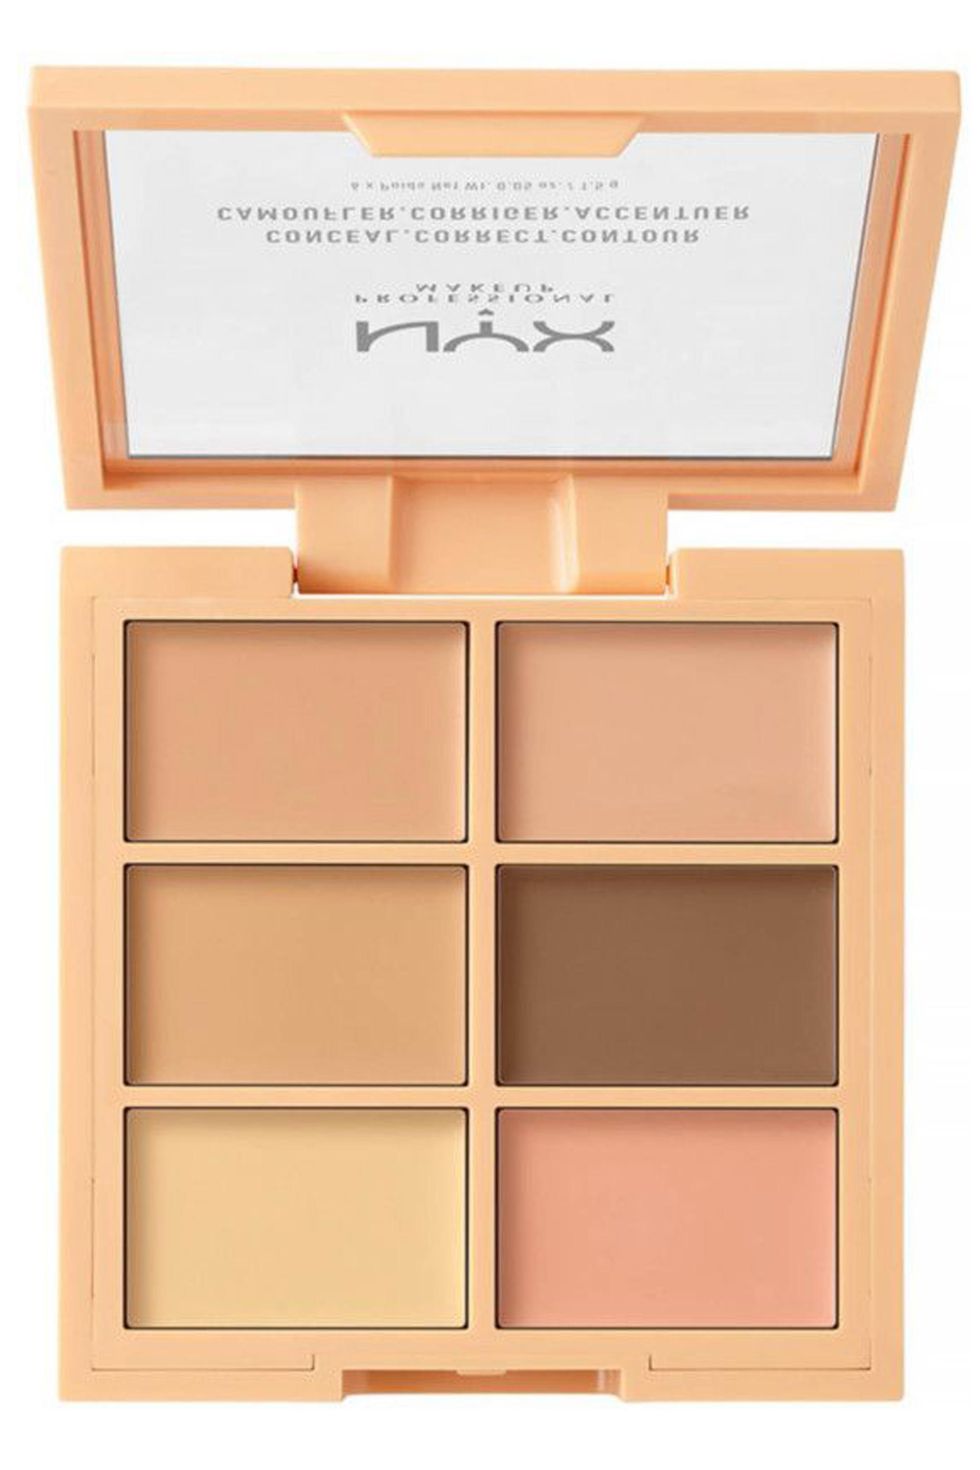 7 Cover Up and Color Correcting Palettes